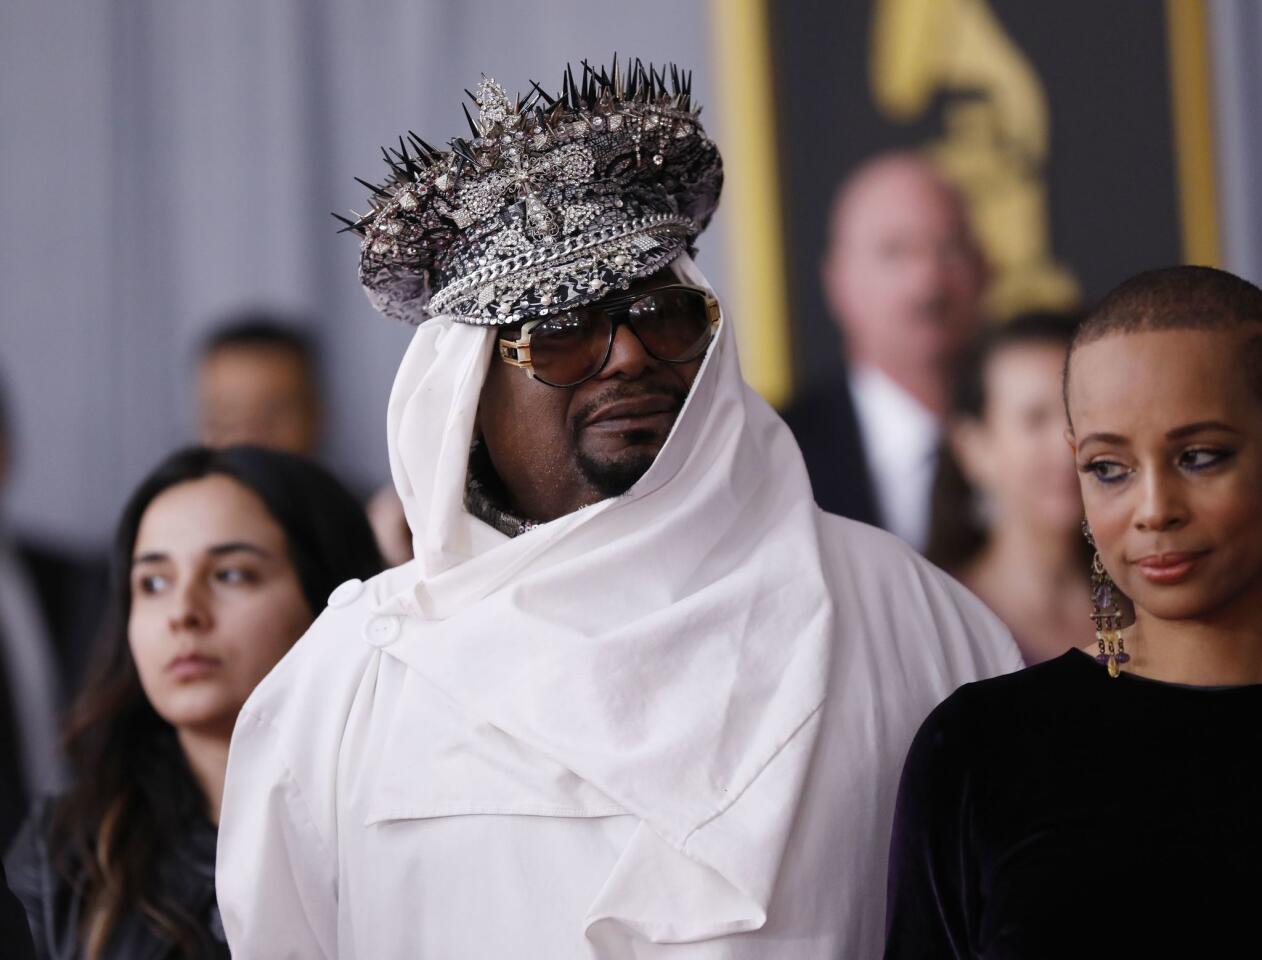 Musician George Clinton arrives at the 59th Annual Grammy Awards in Los Angeles